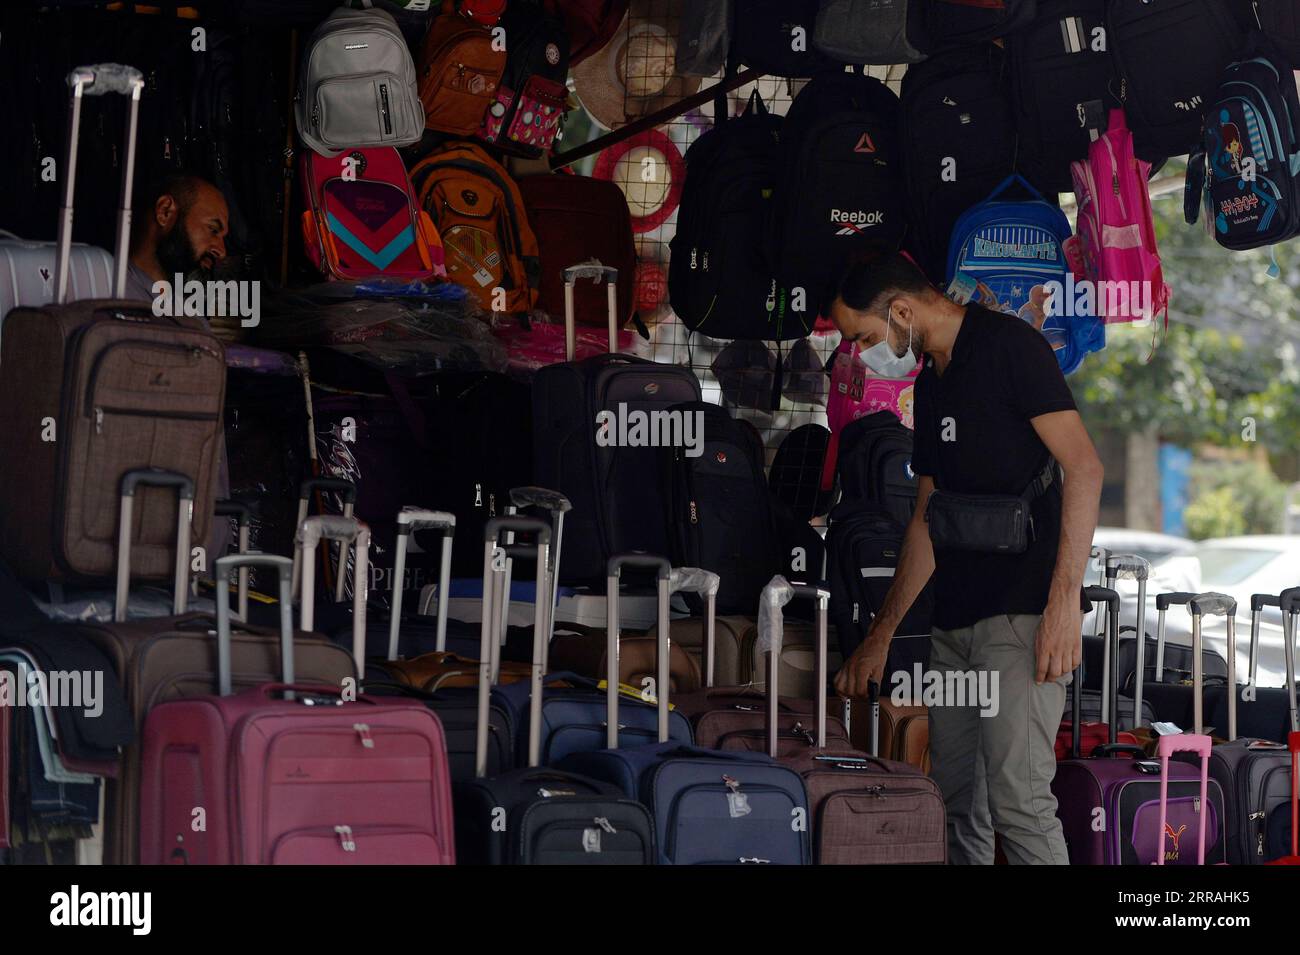 210802 -- RAWALPINDI, Aug. 2, 2021 -- A man wearing a face mask picks a suitcase at a market in Rawalpindi of Pakistan s Punjab Province on Aug. 2, 2021. Pakistan on Sunday reported 4,858 new COVID-19 cases, the National Command and Operation Center NCOC said on Monday. The NCOC said that the country s number of overall confirmed cases had risen to 1,039,695, including 943,020 recoveries.  PAKISTAN-RAWALPINDI-COVID-19-CASES AhmadxKamal PUBLICATIONxNOTxINxCHN Stock Photo